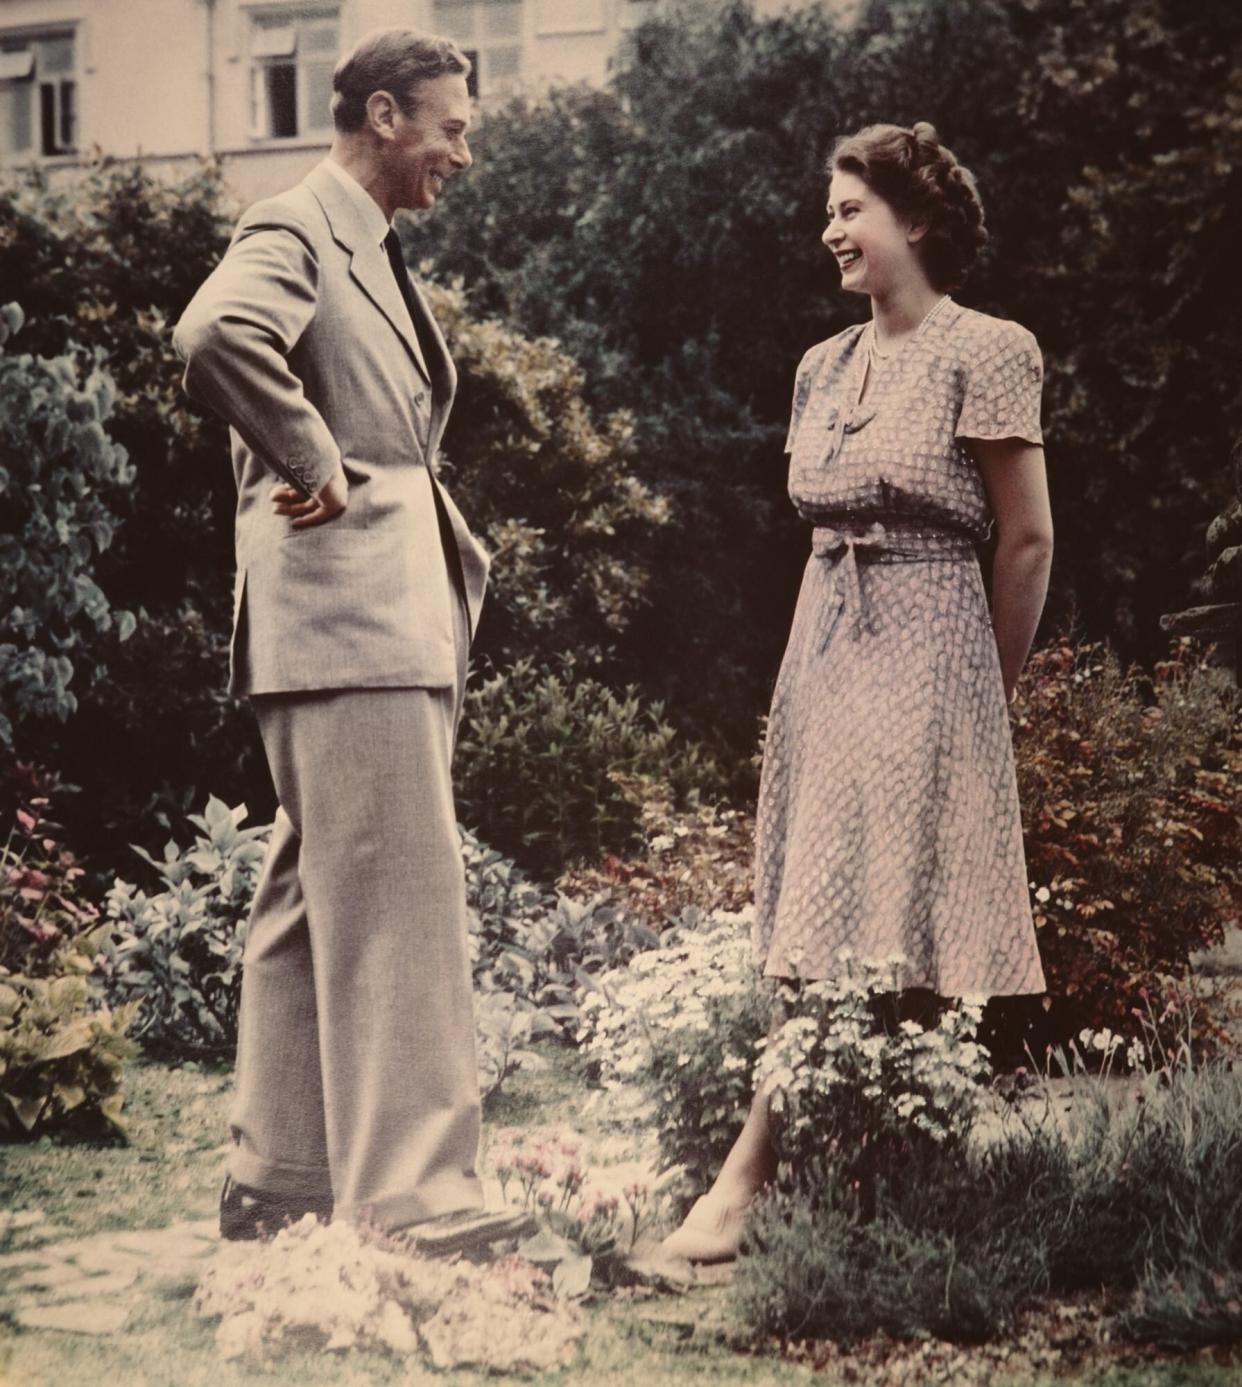 Princess Elizabeth, the future Queen Elizabeth II conversing with her father, King George VI (1895 - 1952) in a garden, 8th July 1946. (Photo by Lisa Sheridan/Studio Lisa/Hulton Archive/Getty Images)